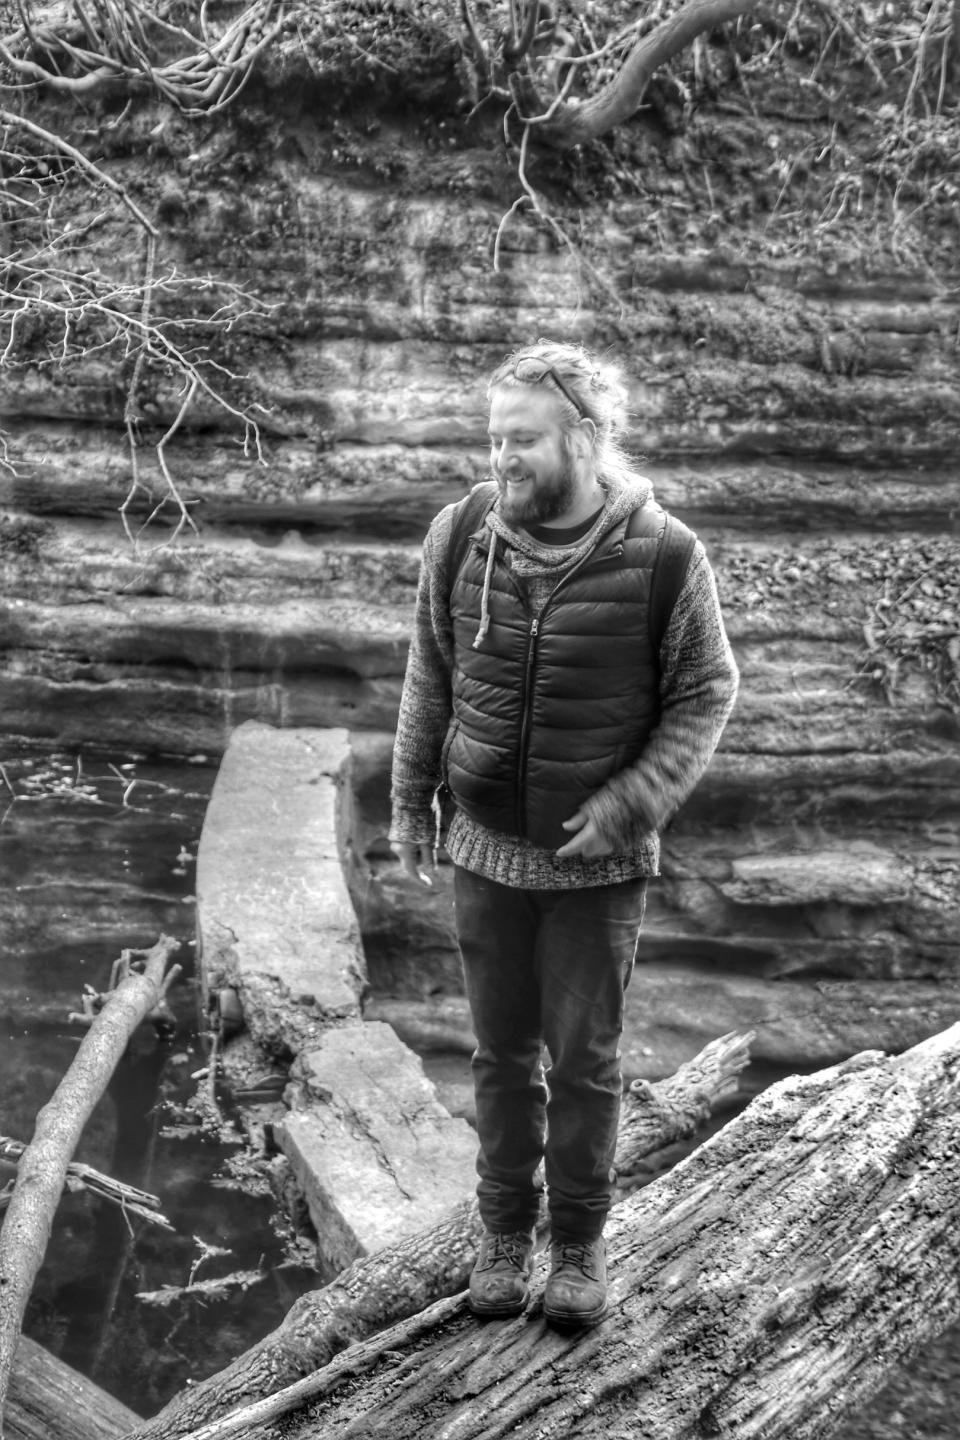 In this photo provided by Russ Boxer, Kevin Clark stands in Matthiessen State Park near Oglesby, Ill., in November 2020. Clark, who played drummer Freddy “Spazzy McGee” Jones in the 2003 movie “School of Rock” with Jack Black, was killed when he was struck by a car while riding his bicycle along a Chicago street early Wednesday, May 26. (Russ Boxer via AP)